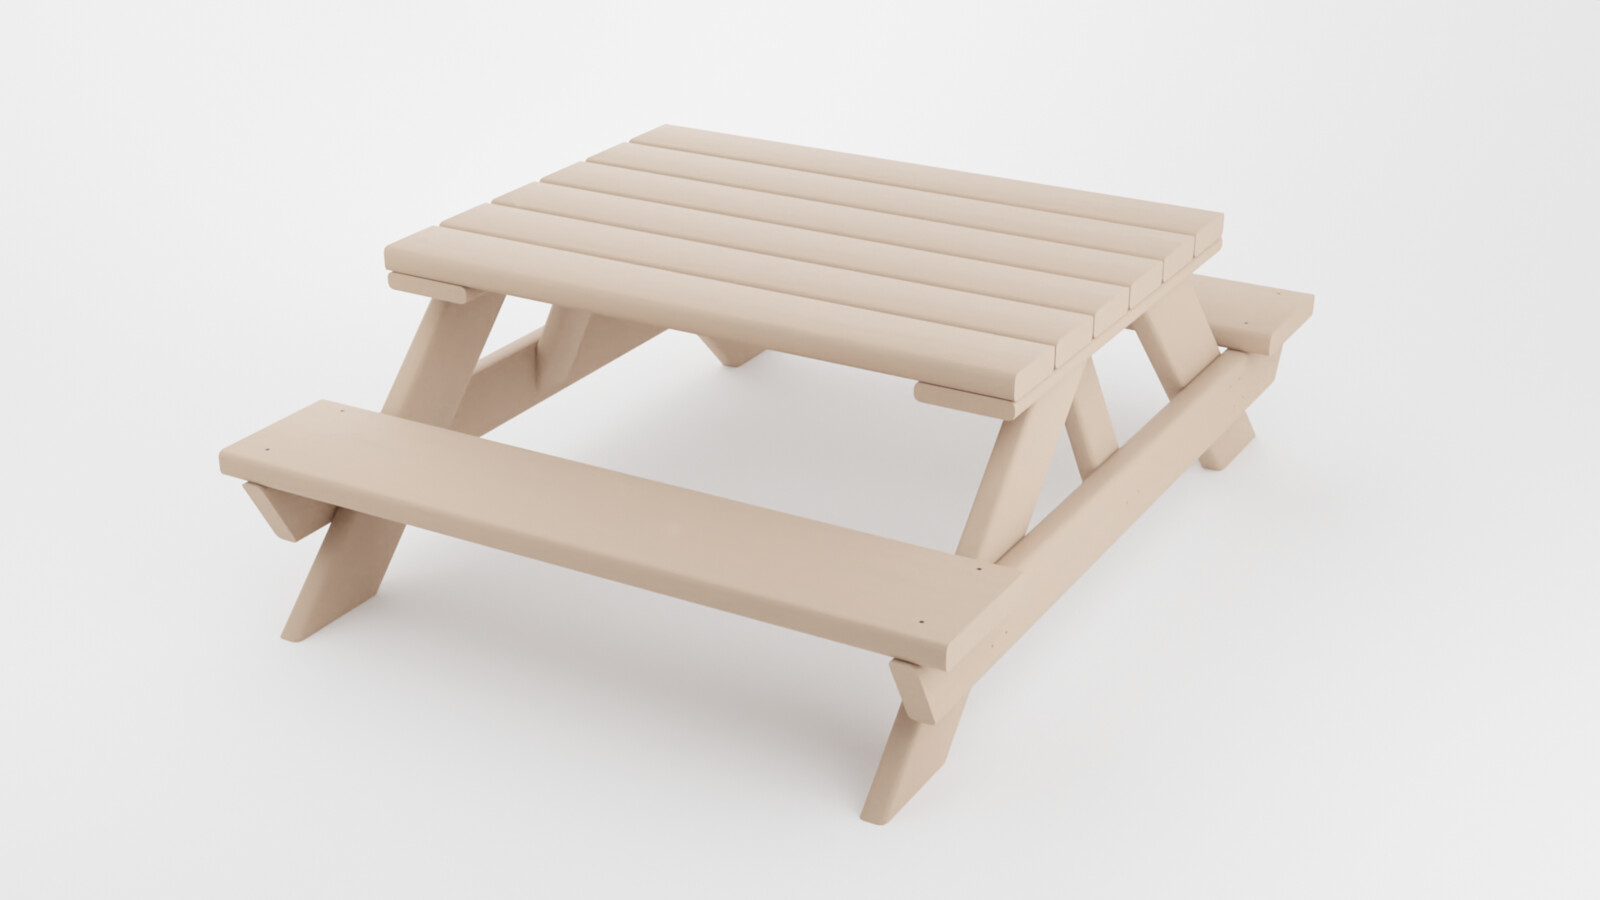 Picnic Table render 1